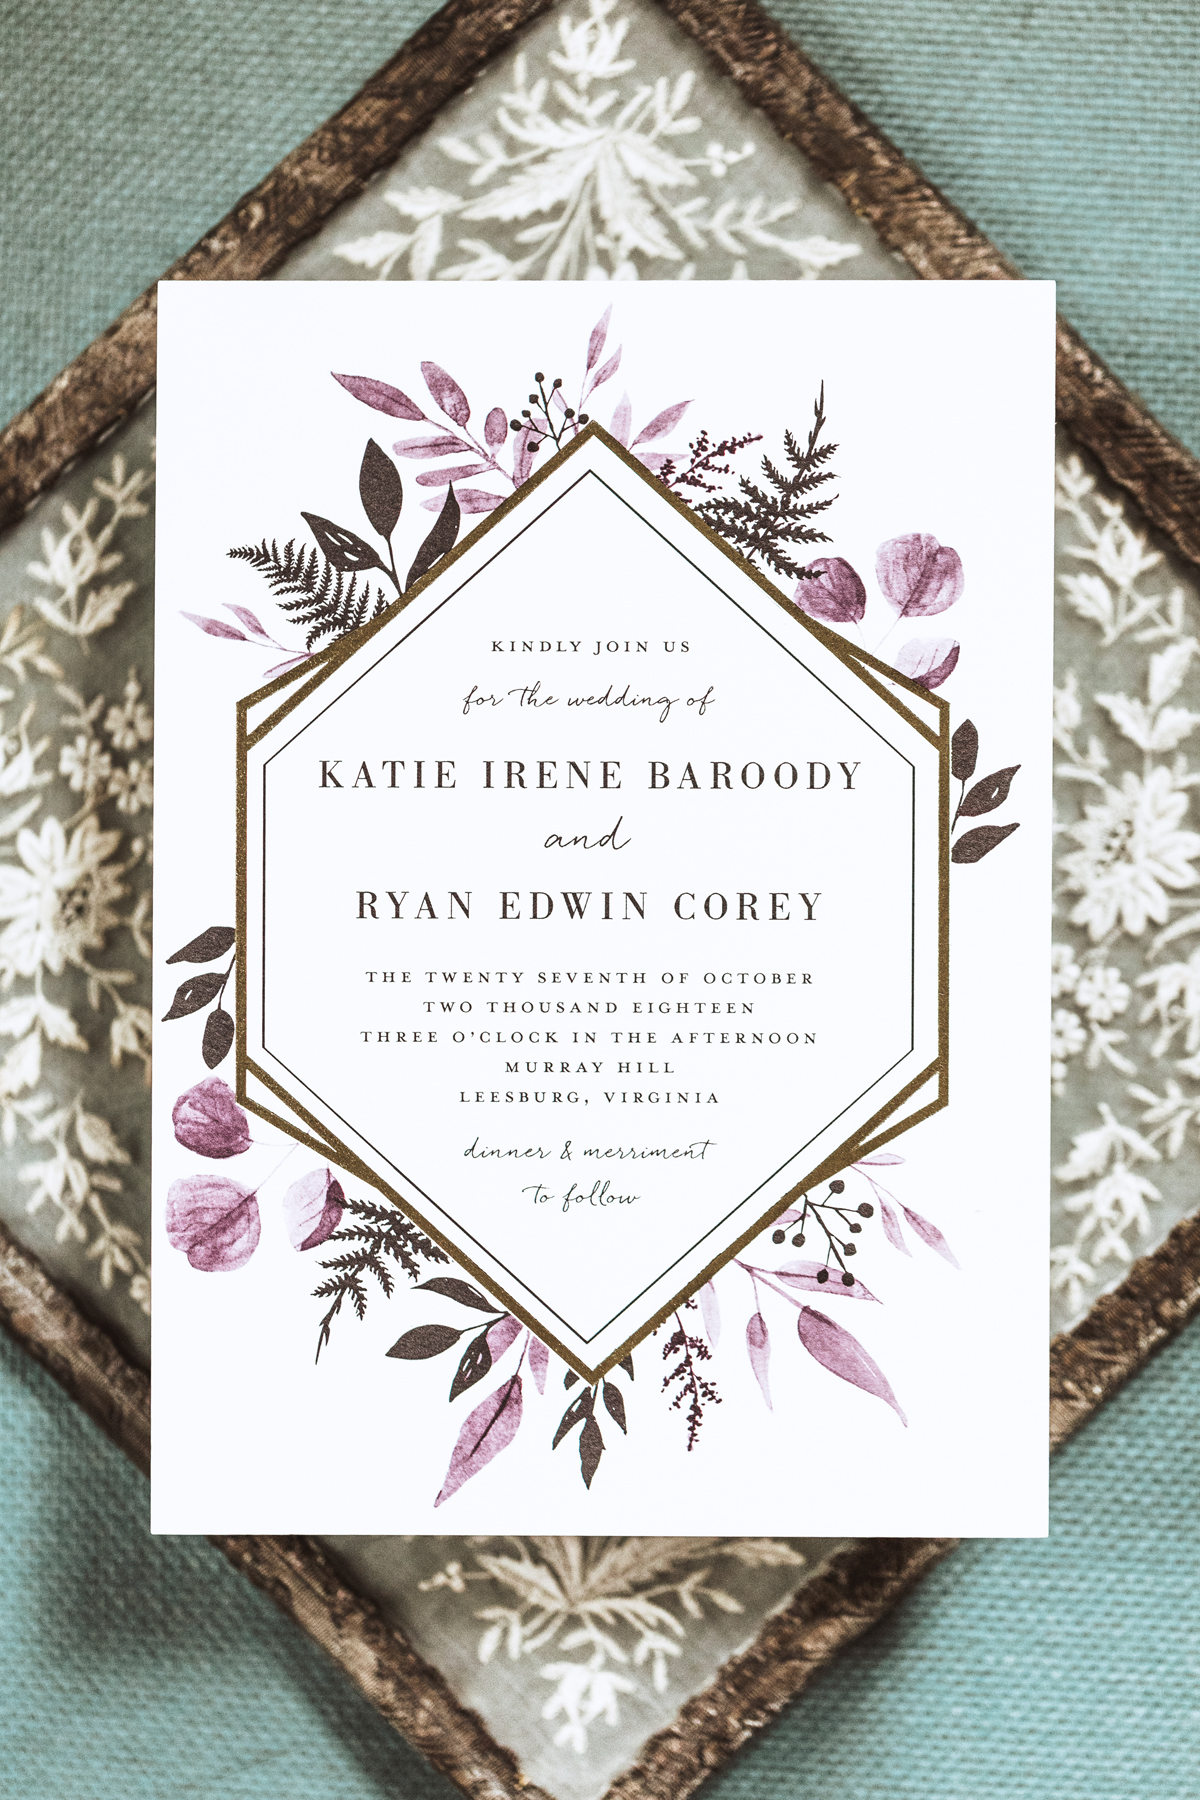   DO: Try front and back invitations, and make your RSVP option online only to save paper. No one will be offended!  